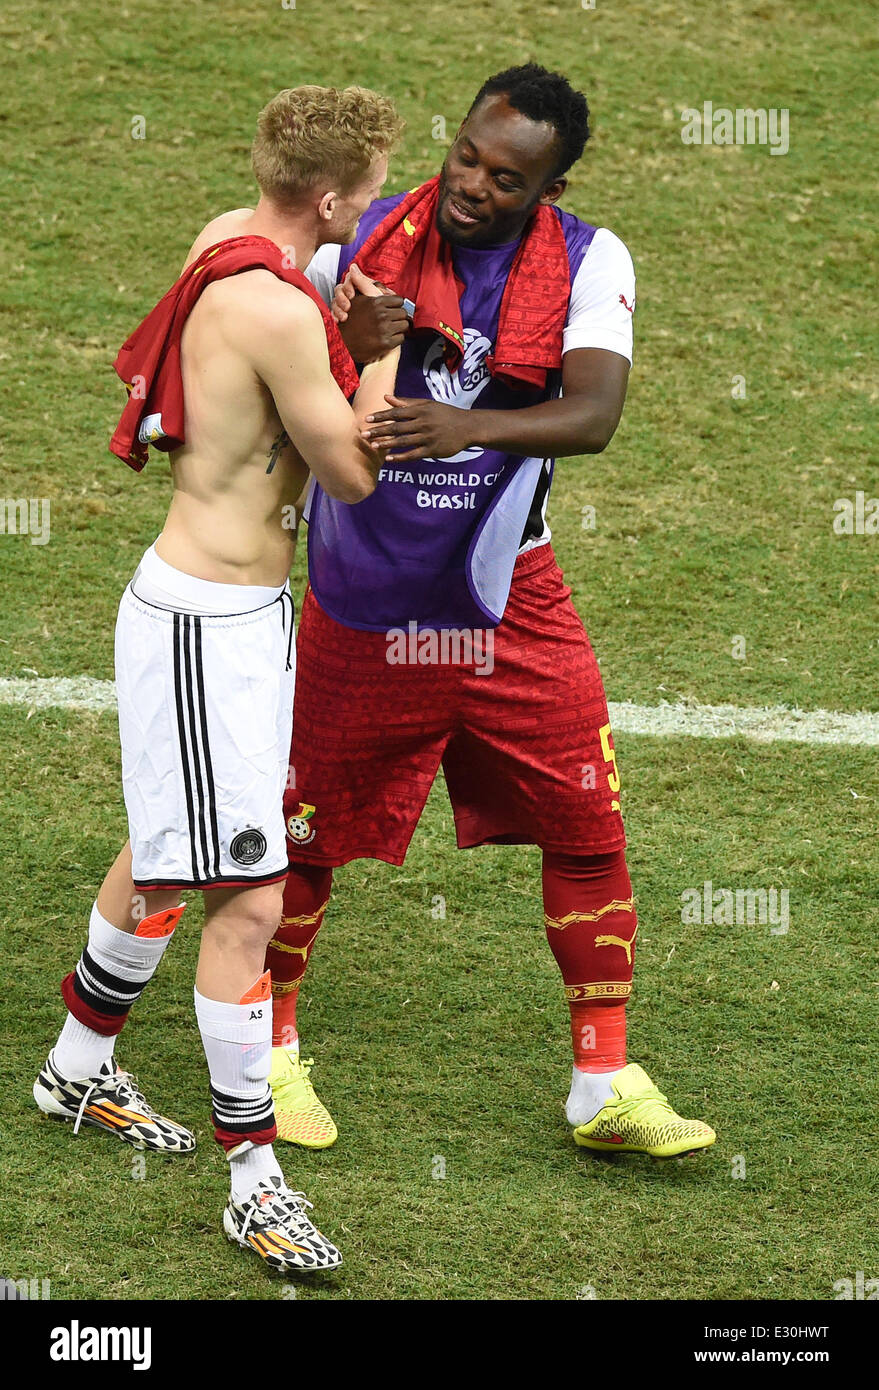 Fortaleza, Brazil. 21st June, 2014. Germany's Andre Schuerrle (L) talks to Ghana's Michael Essien after the FIFA World Cup 2014 group G preliminary round match between Germany and Ghana at the Estadio Castelao Stadium in Fortaleza, Brazil, 21 June 2014. Photo: Marcus Brandt/dpa/Alamy Live News Stock Photo